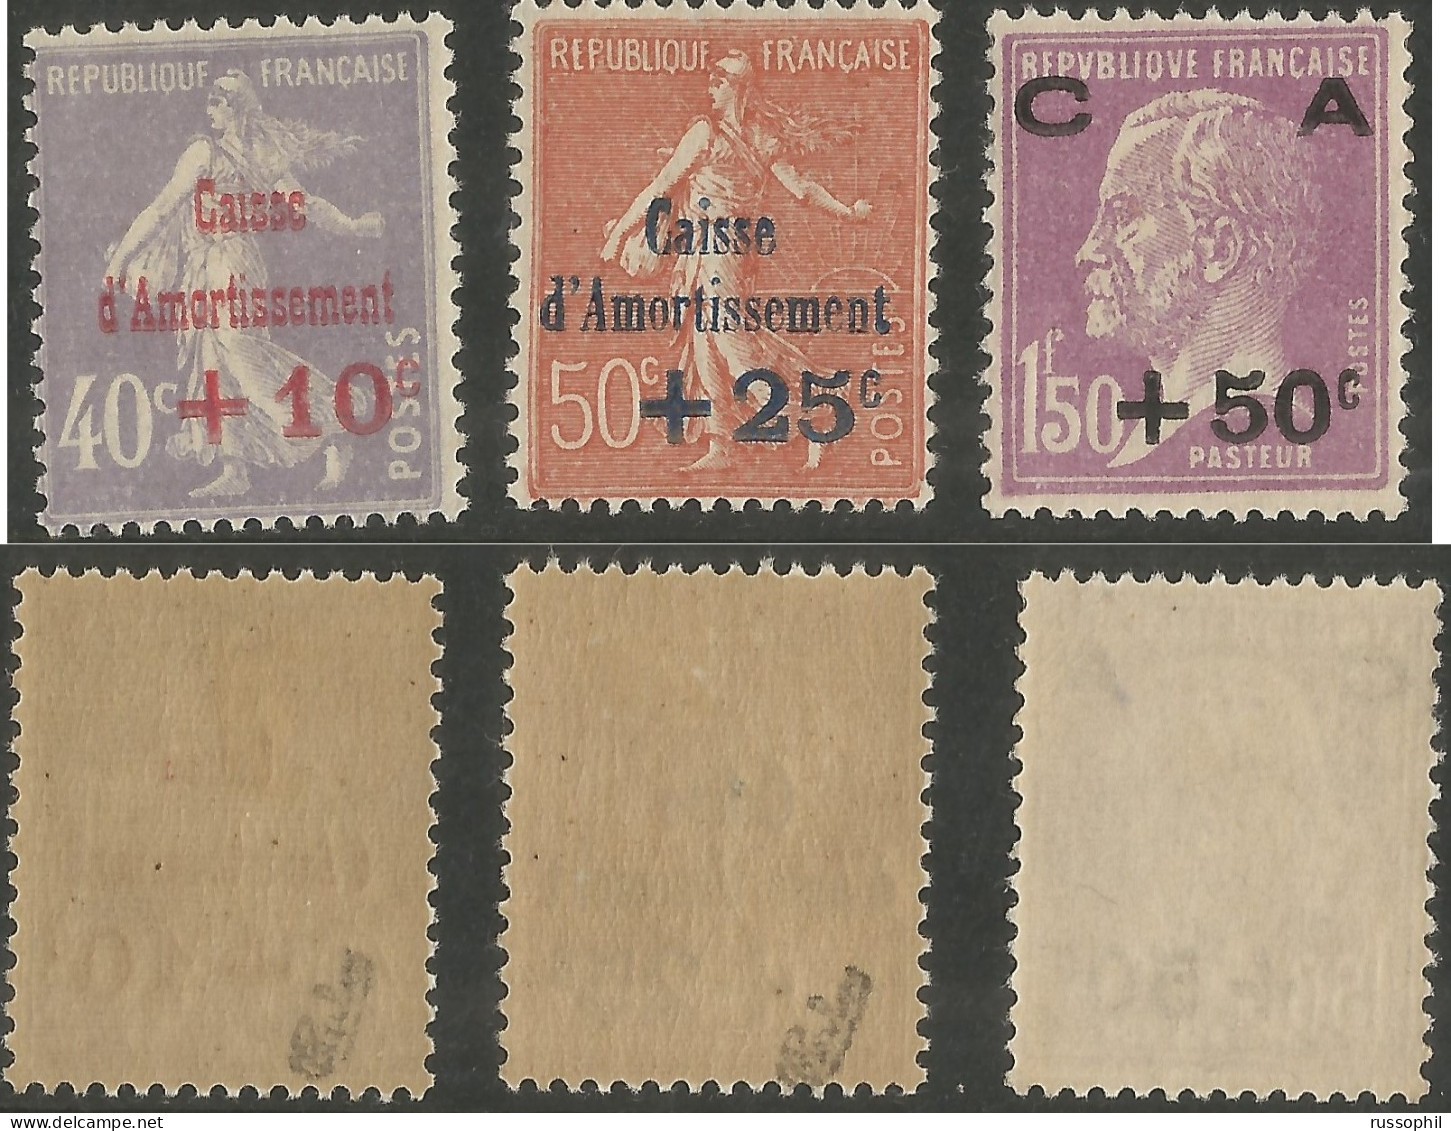 FRANCE - CAISSE D'AMORTISSEMENT - Yv. # 249 TO #251 - YV. #249 AND #250 (MH *) CALVES -  Yv 251 (MNH **) - 1928 - 1927-31 Cassa Di Ammortamento